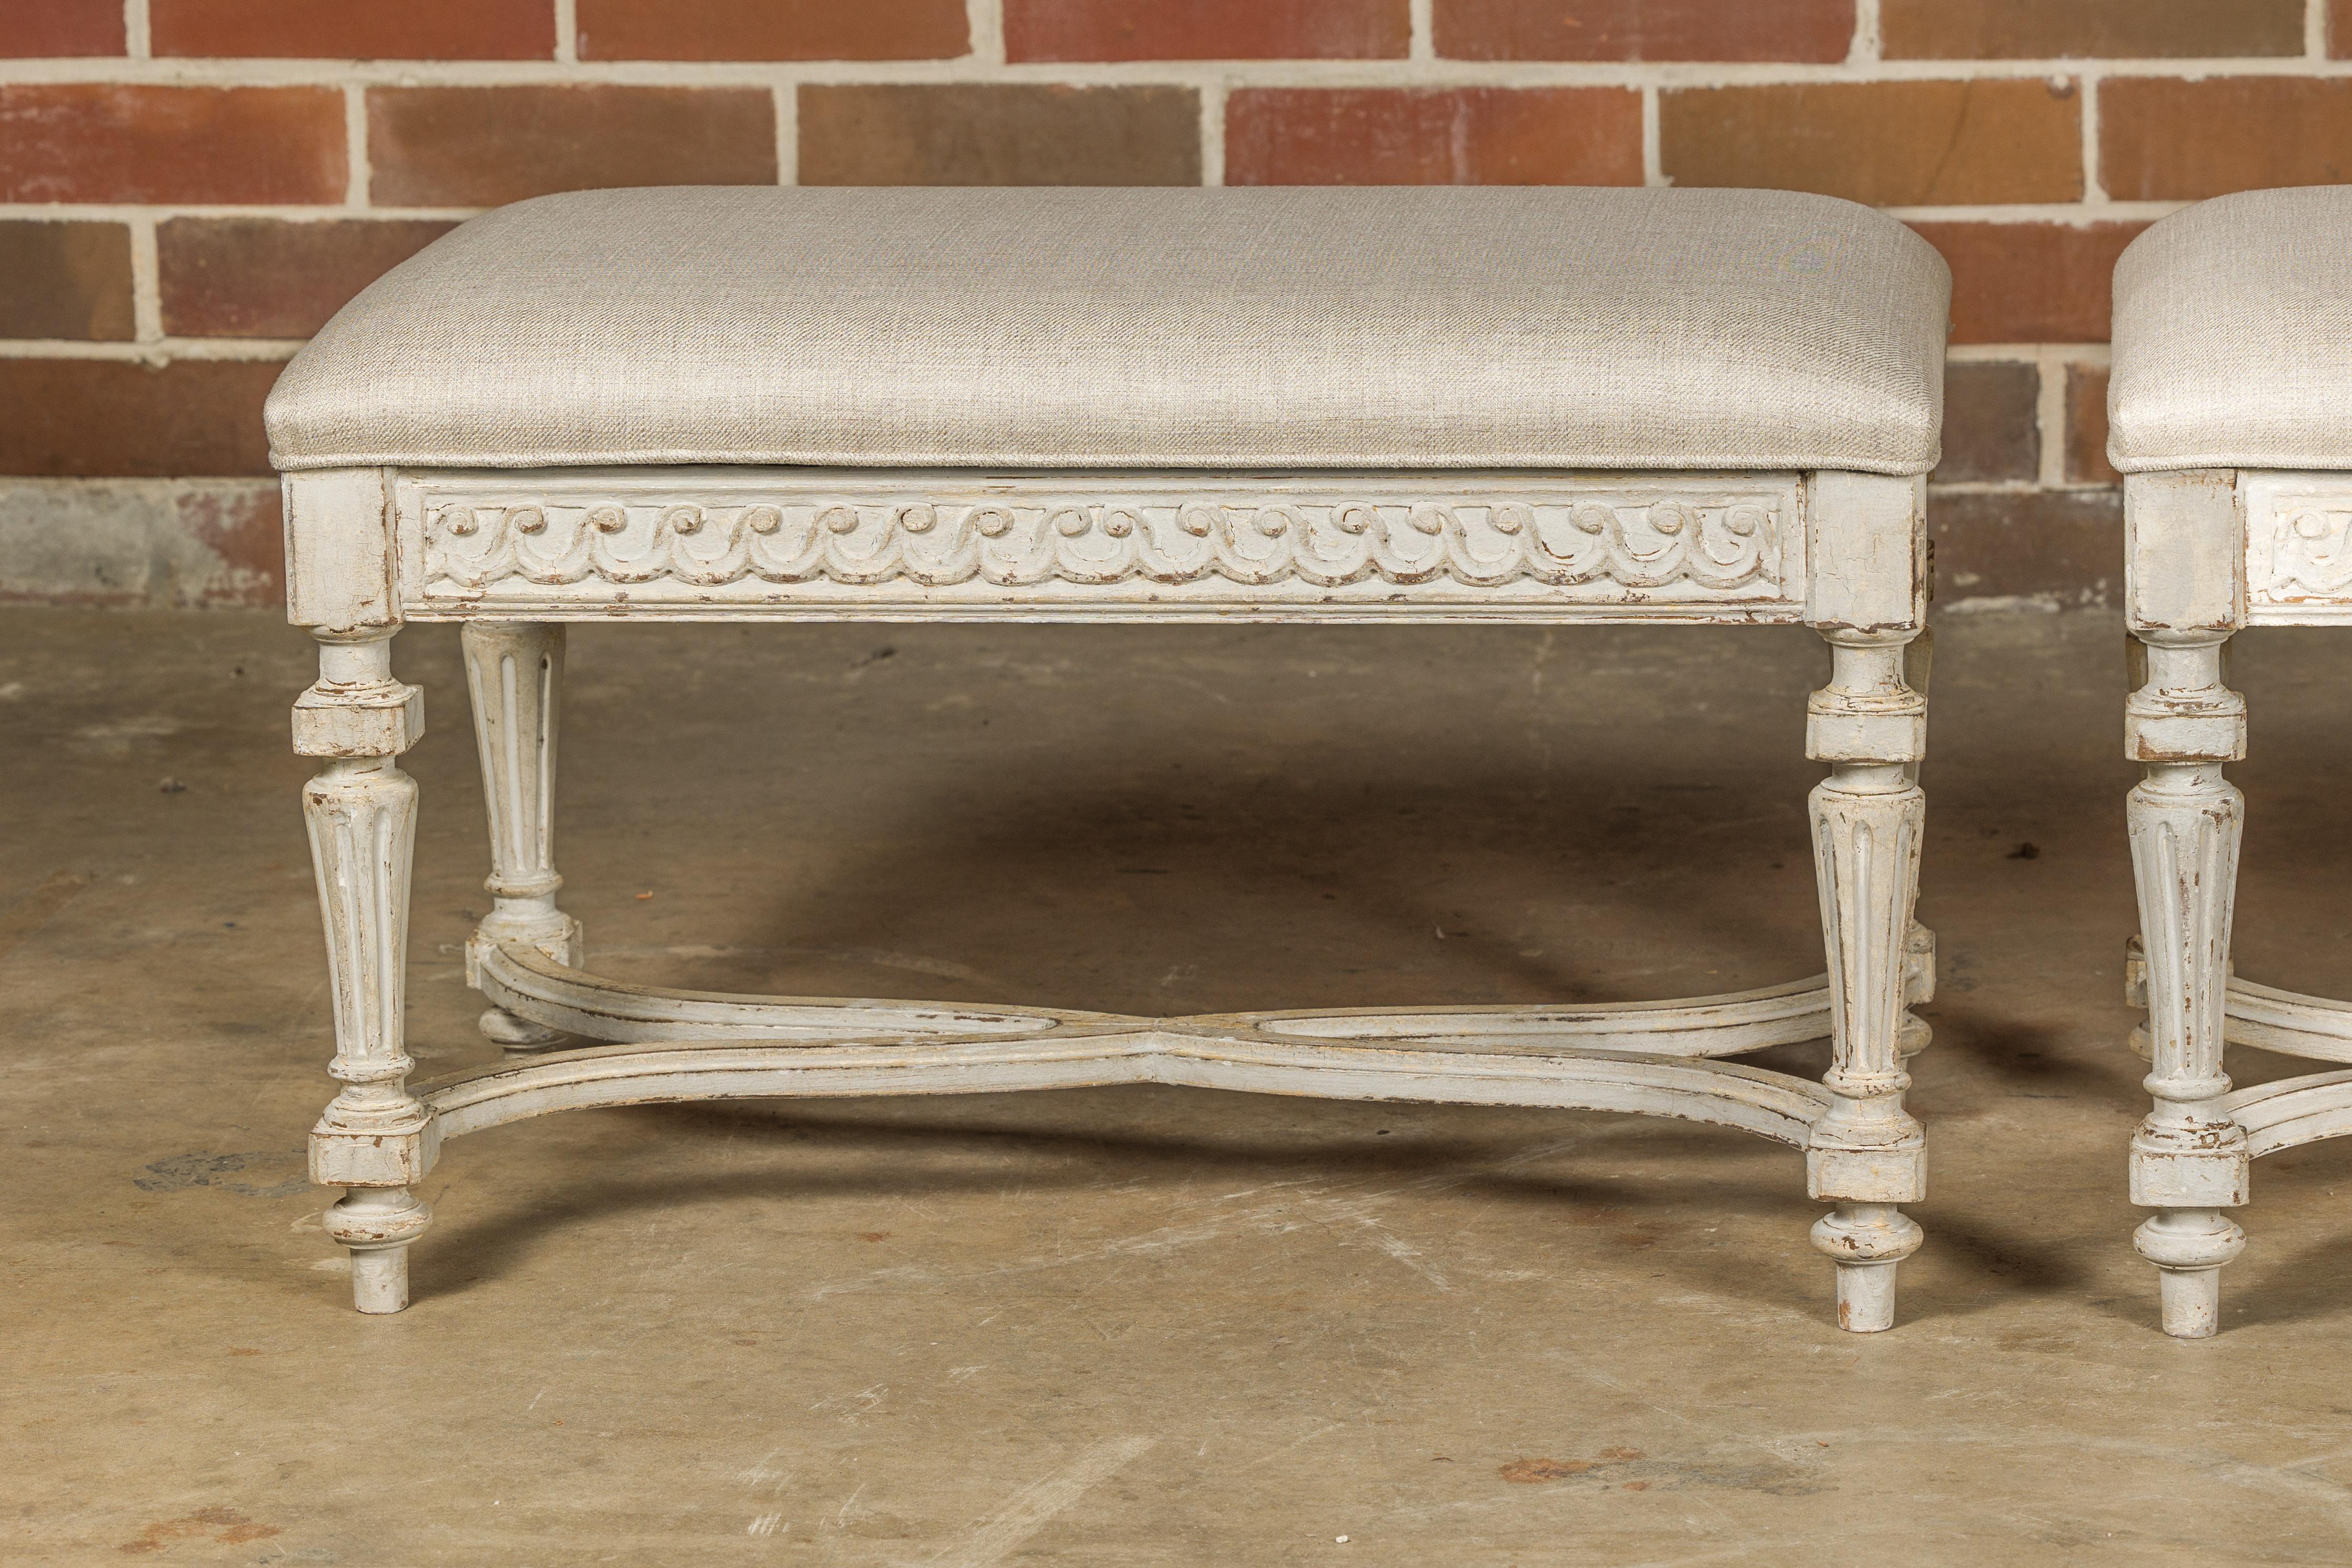 20th Century Neoclassical Style French Painted Benches with Carved Vitruvian Scrolls, a Pair